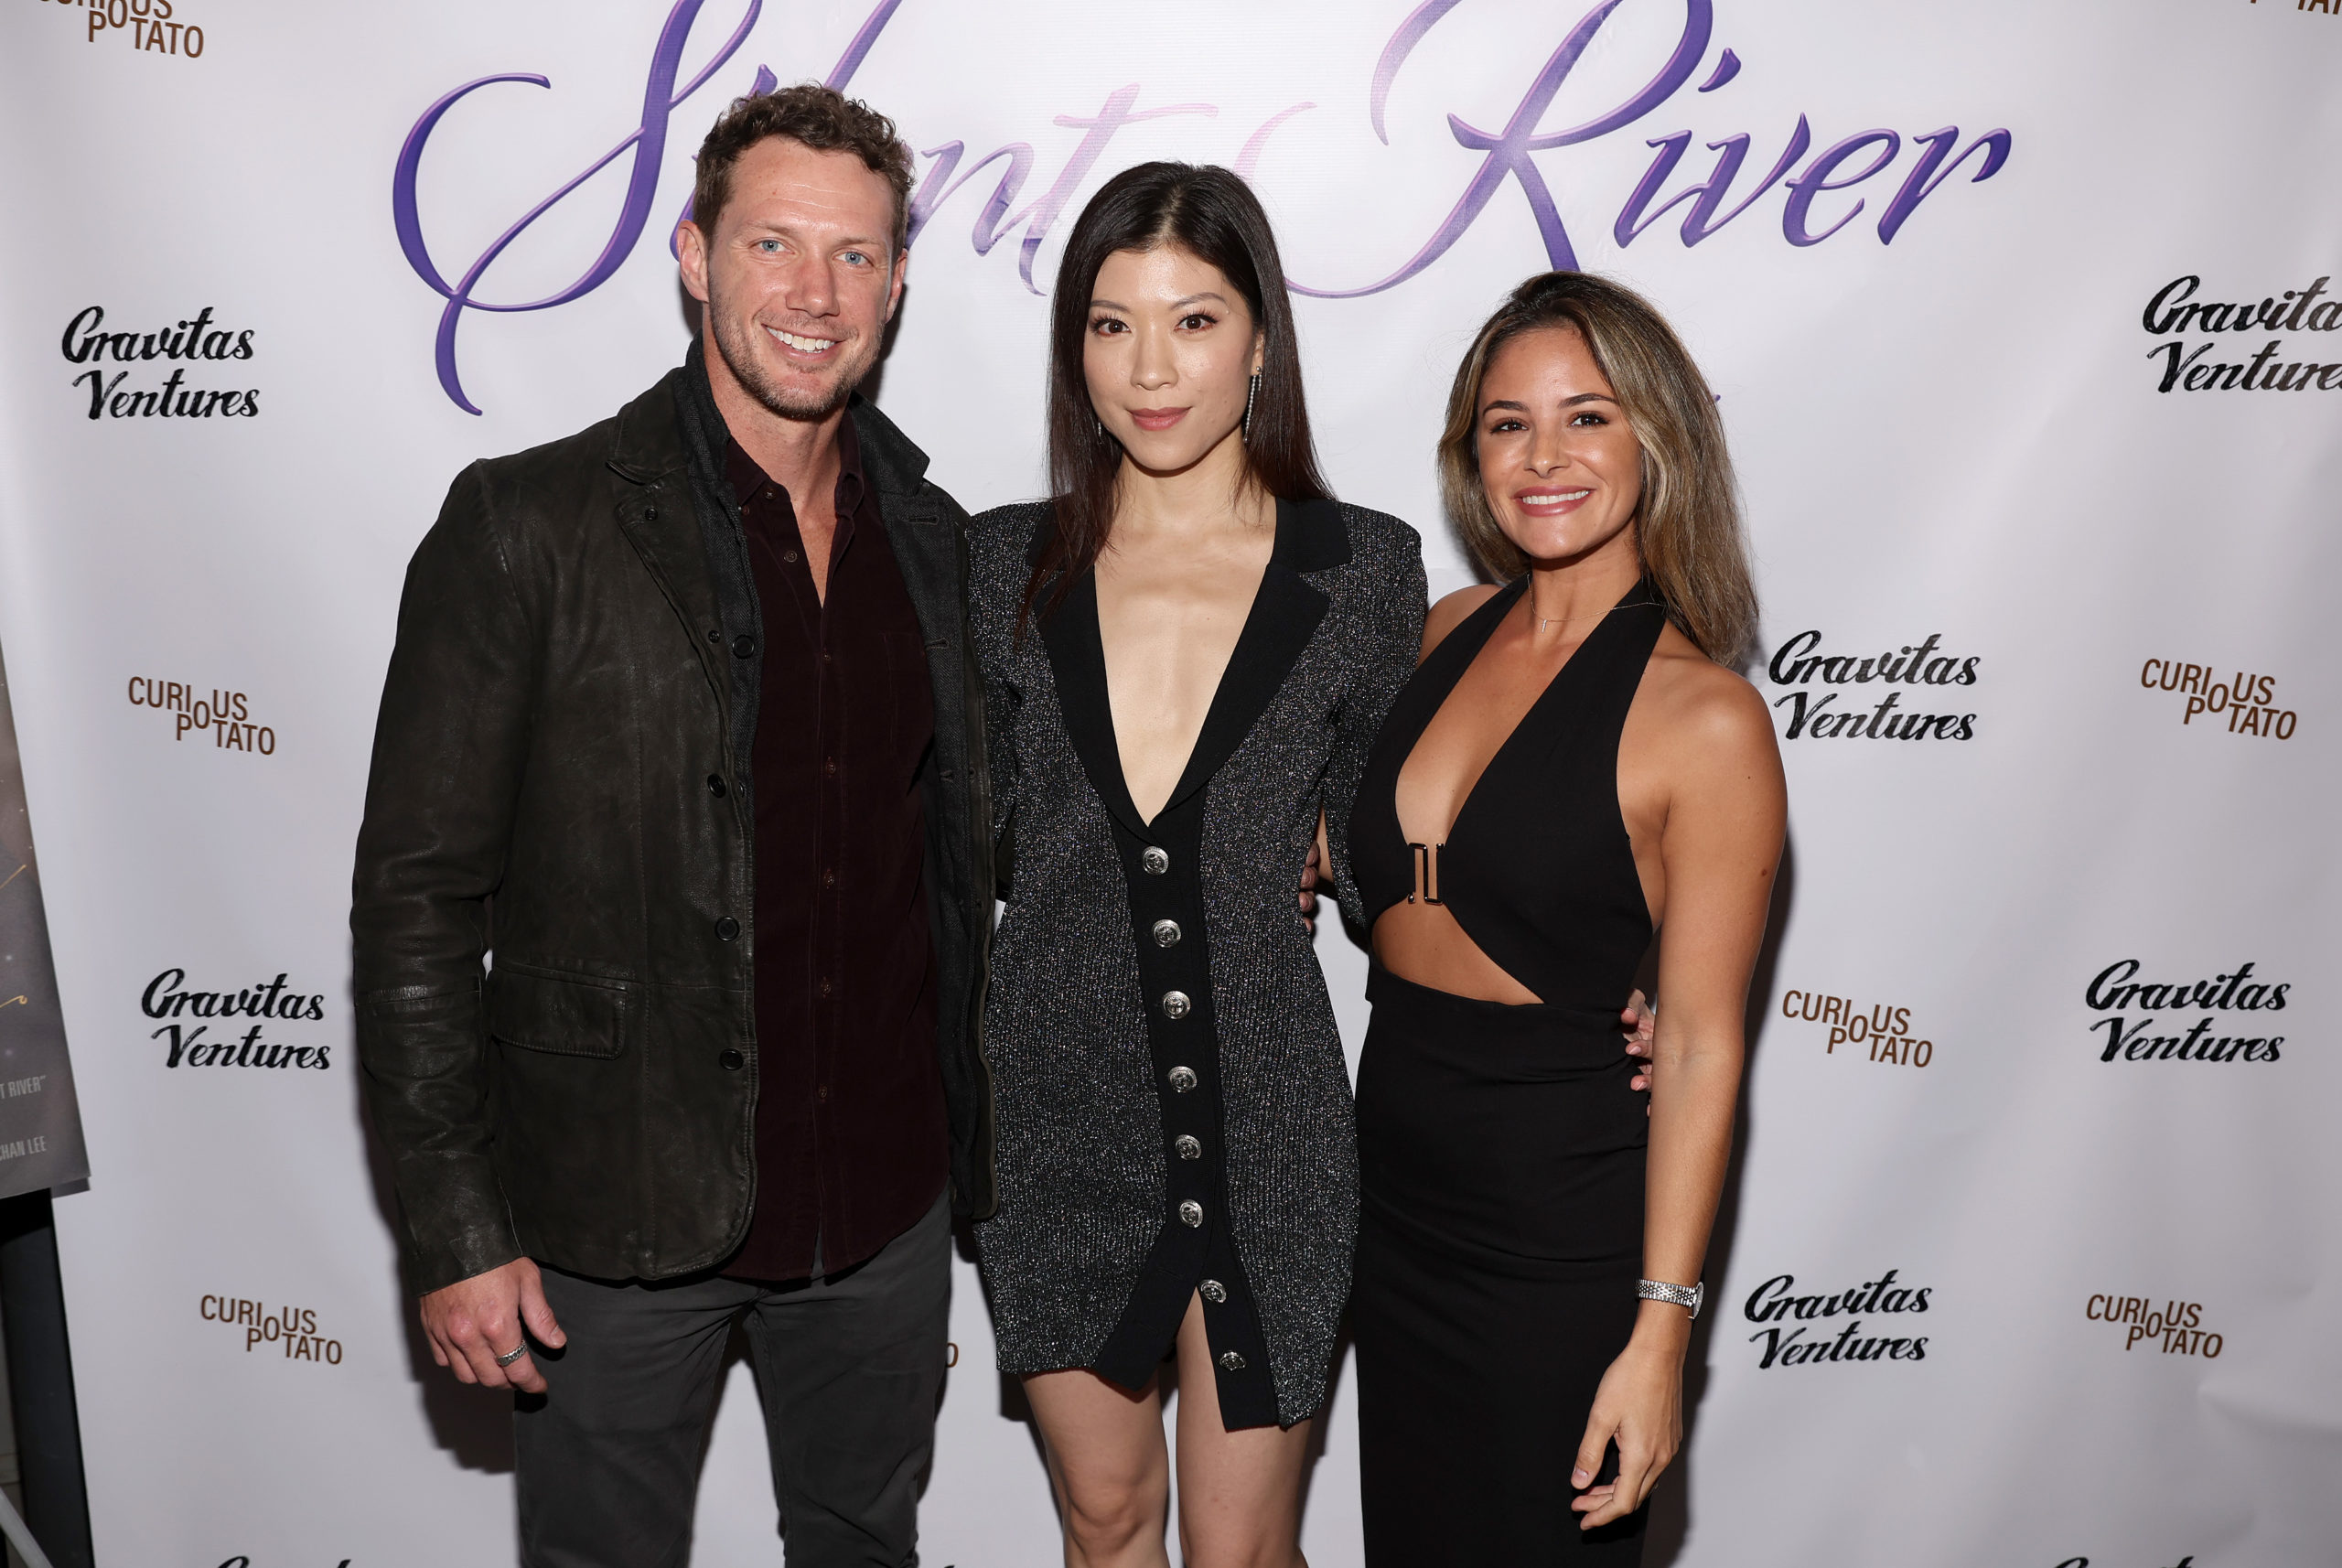 GLENDALE, CALIFORNIA - OCTOBER 13: (L-R) Johnny Wactor, Amy Tsang and Adriana Bernardo attend the "Silent River" Opening Night Theatrical Premiere at Laemmle Glendale on October 13, 2022 in Glendale, California. (Photo by Jesse Grant/Getty Images for Curious Potato)